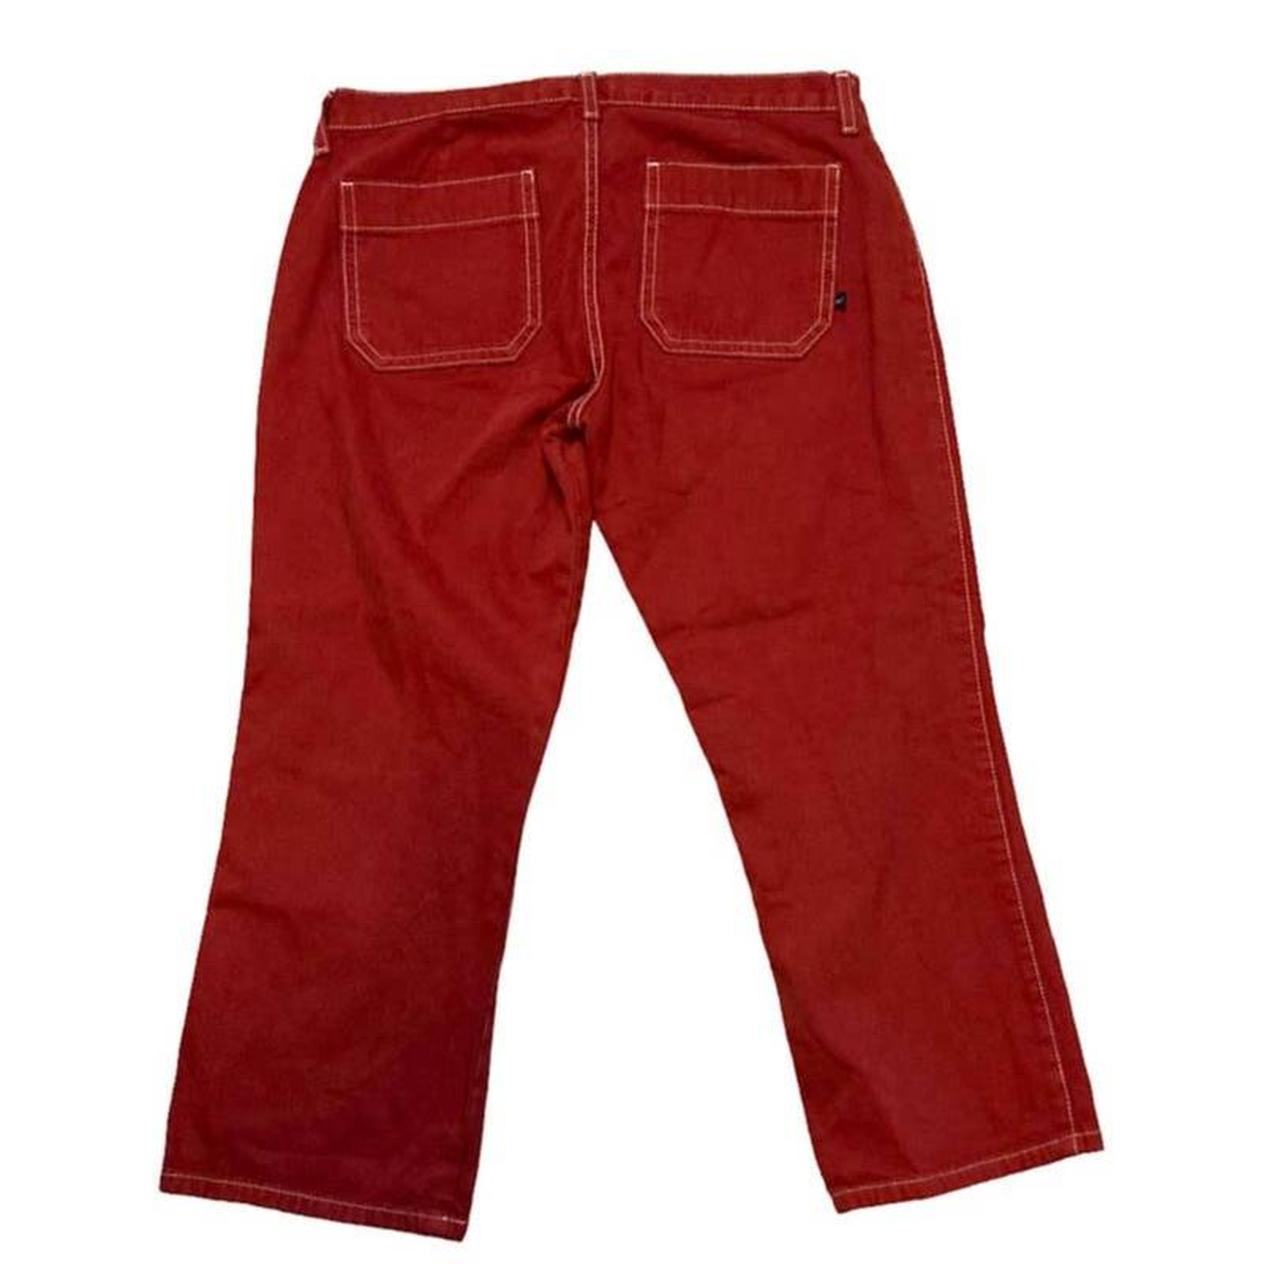 Abercrombie & Fitch Women's Red and White Trousers (2)